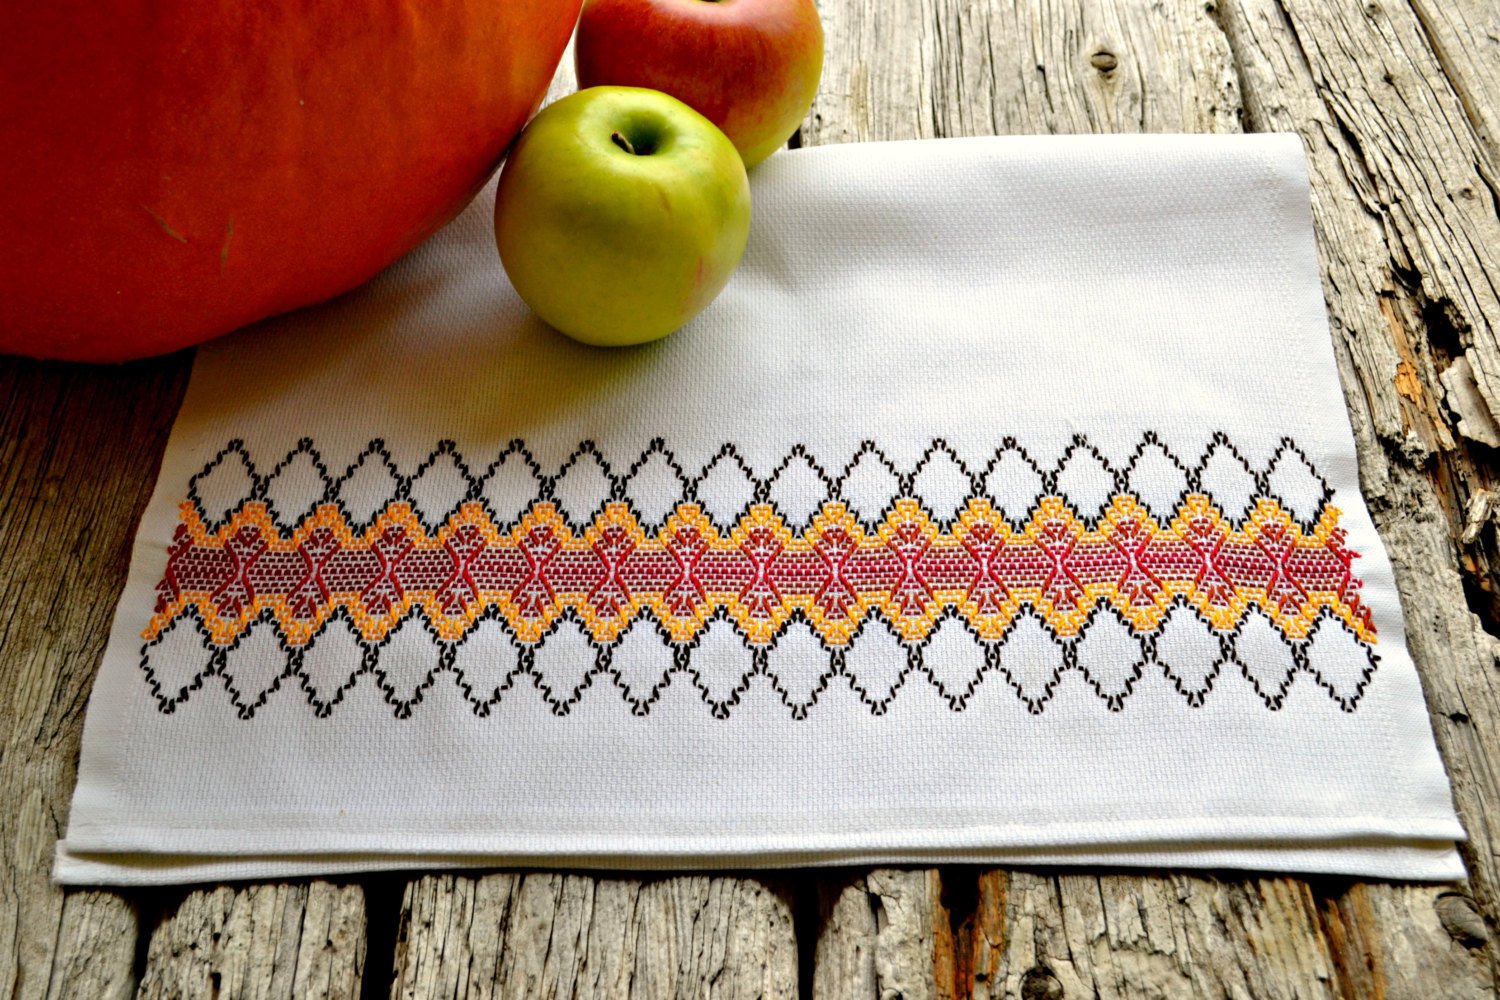 Tea towel decorated with a band of embroidery in autumnal colors